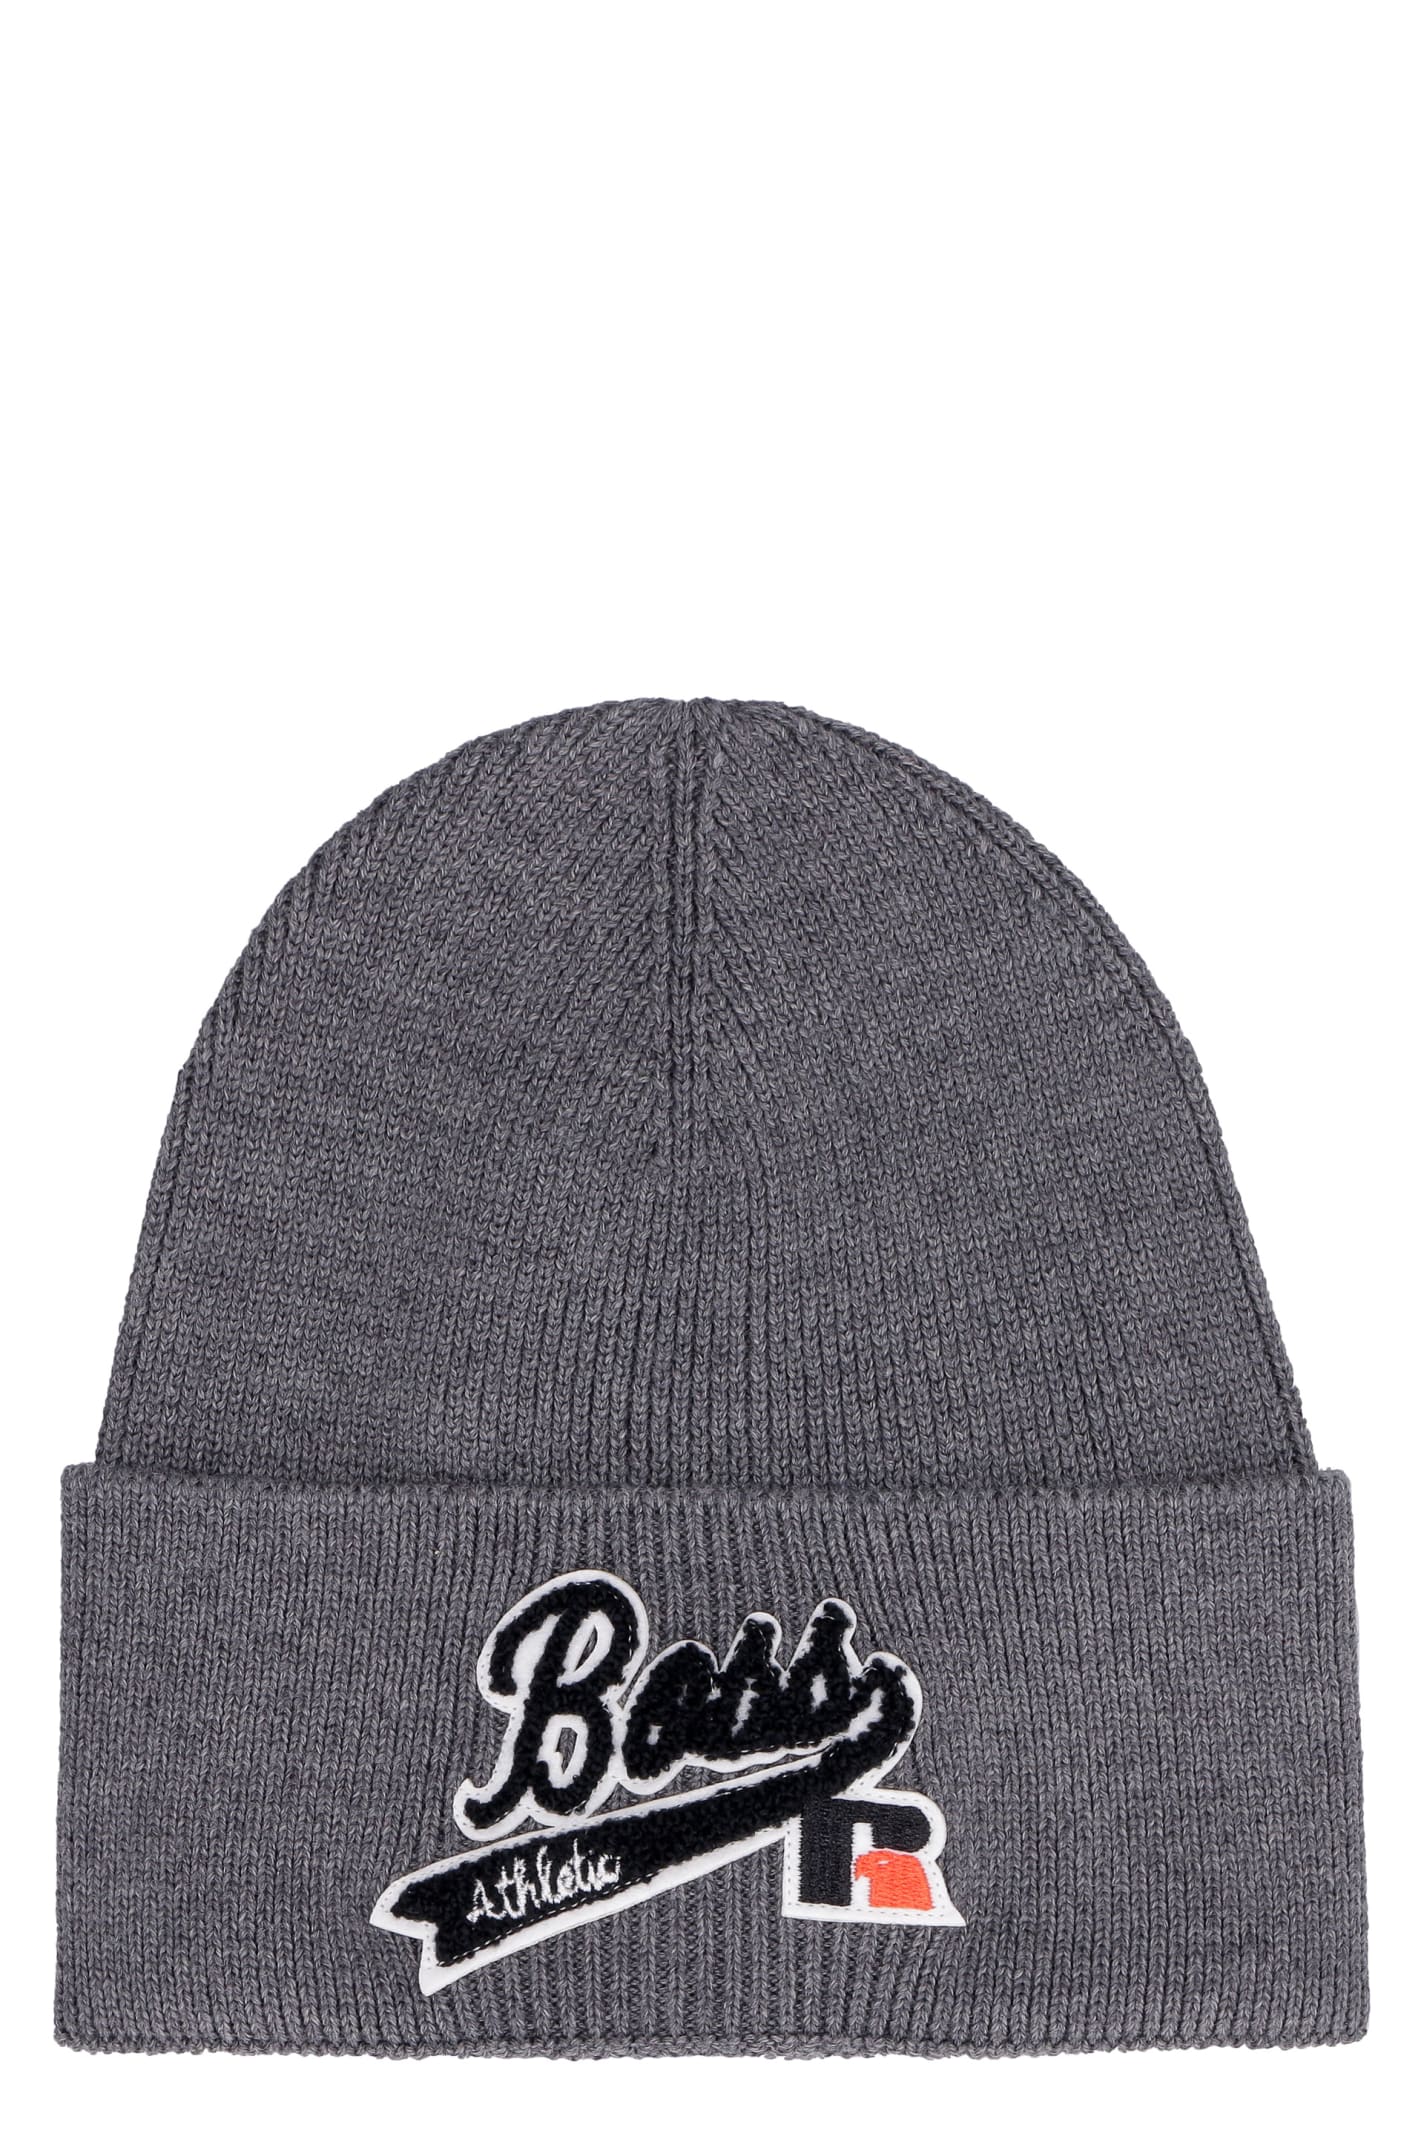 Hugo Boss Boss X Russell Athletic - Knitted Hat